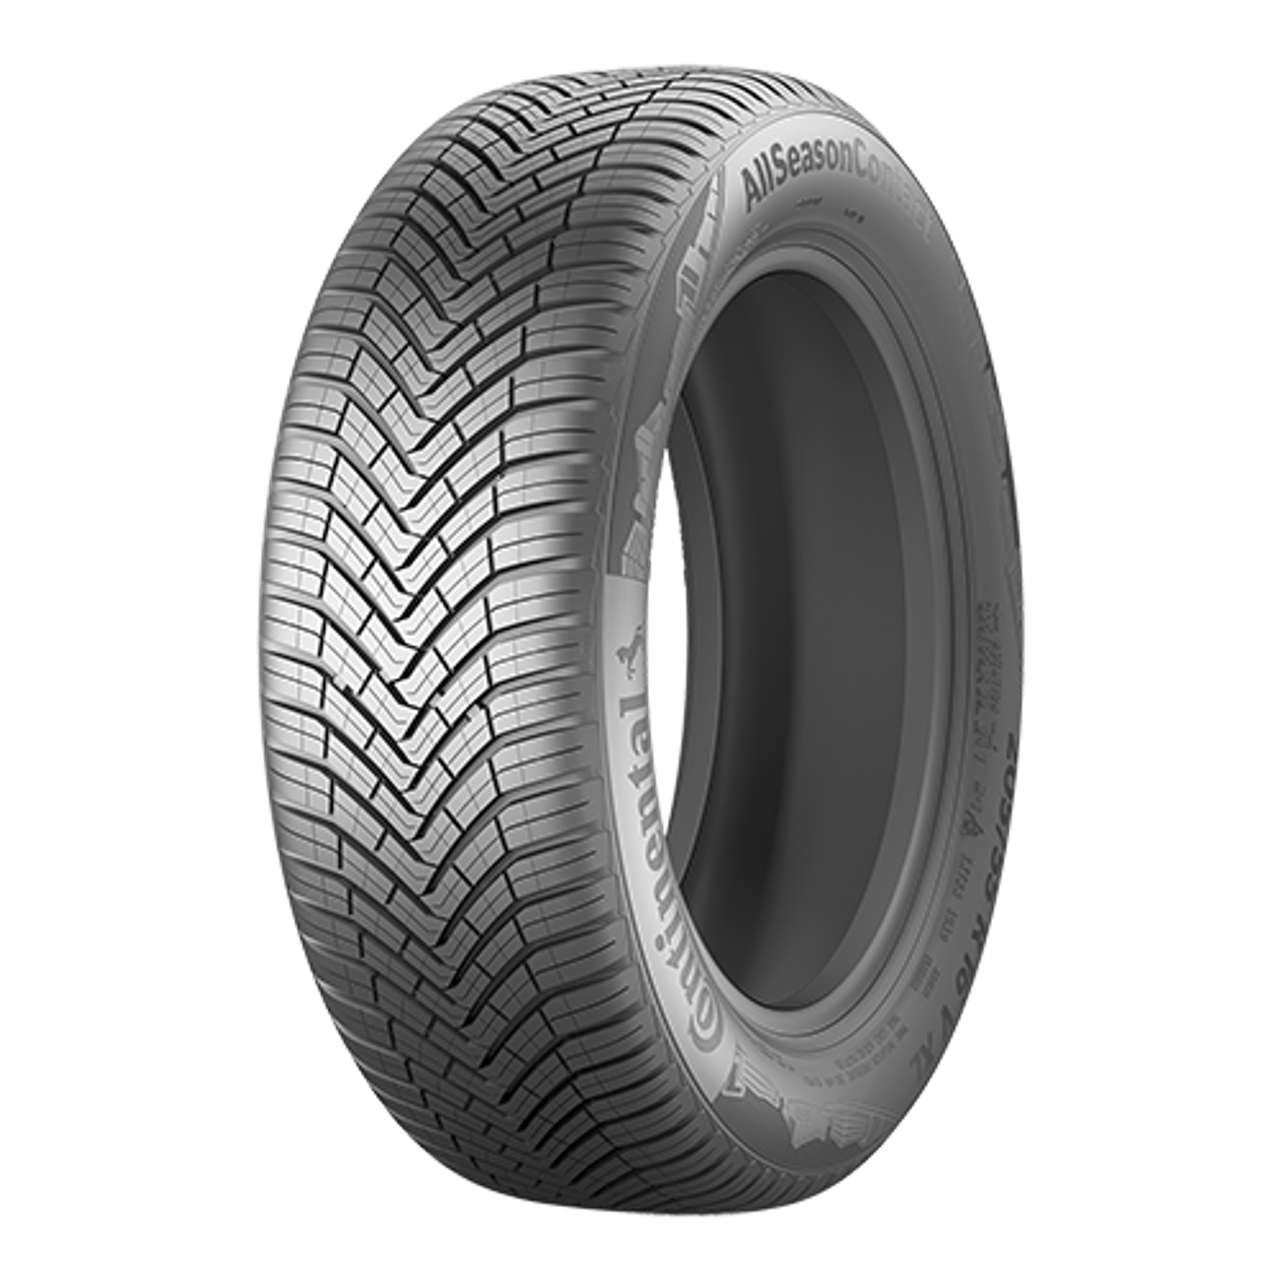 CONTINENTAL ALLSEASONCONTACT (EVc) 195/60R16 89H BSW